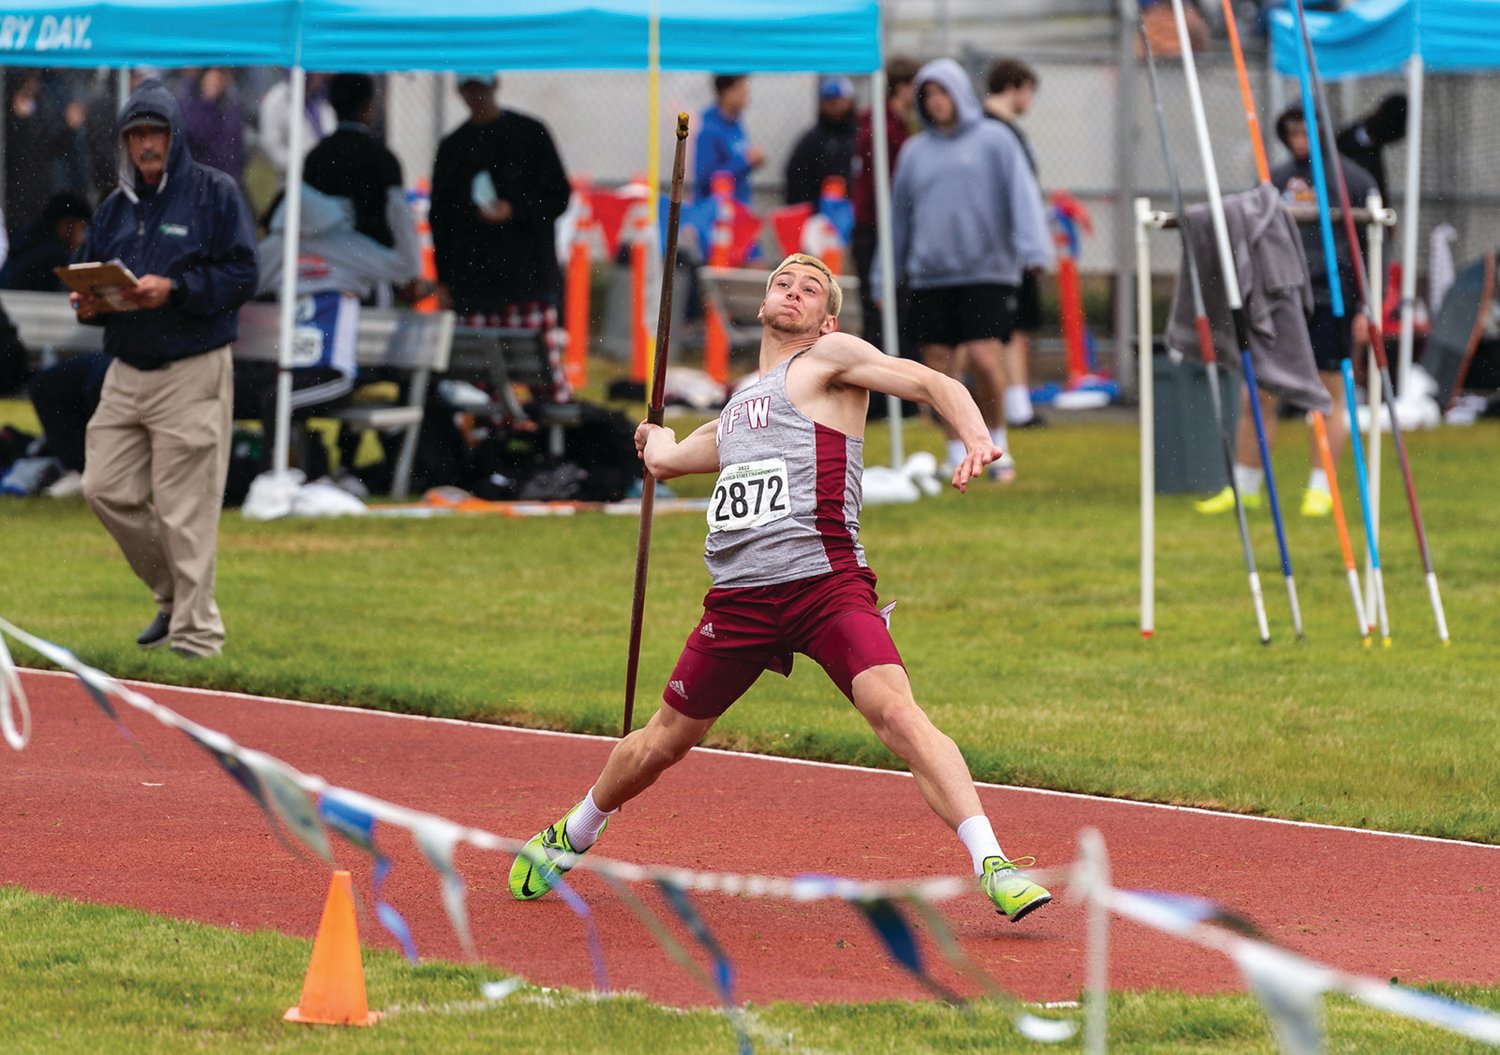 W.F. West's Seth Hoff launches a javelin in the 2A Boys Javelin at the 4A/3A/2A State Track and Field Championships on Saturday, May 28, 2022, at Mount Tahoma High School in Tacoma.